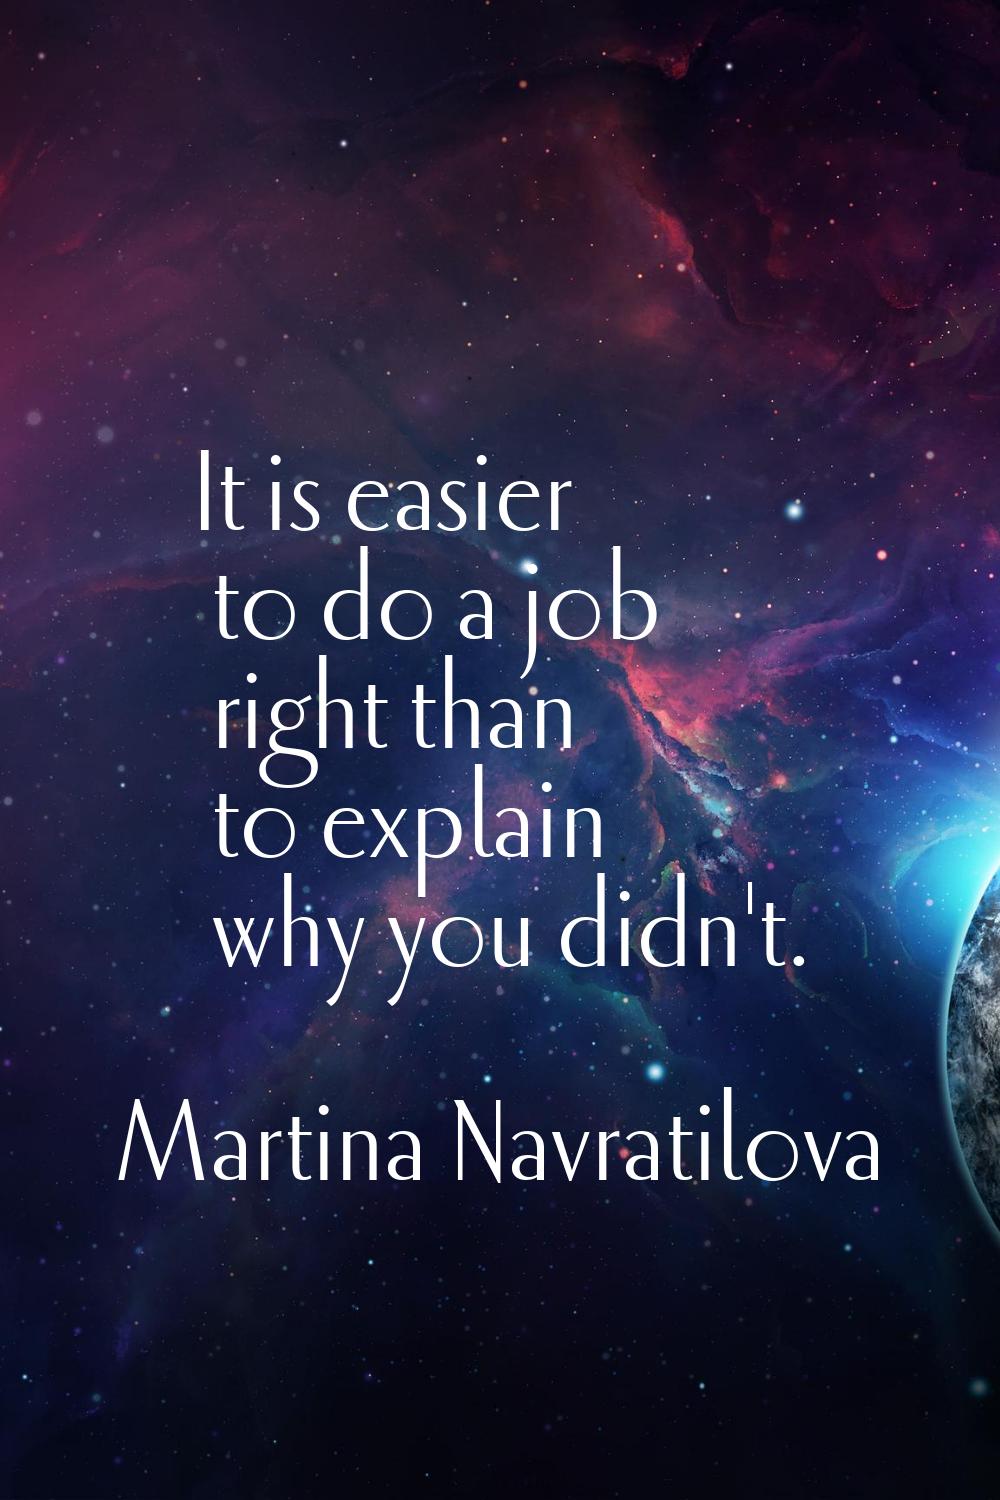 It is easier to do a job right than to explain why you didn't.